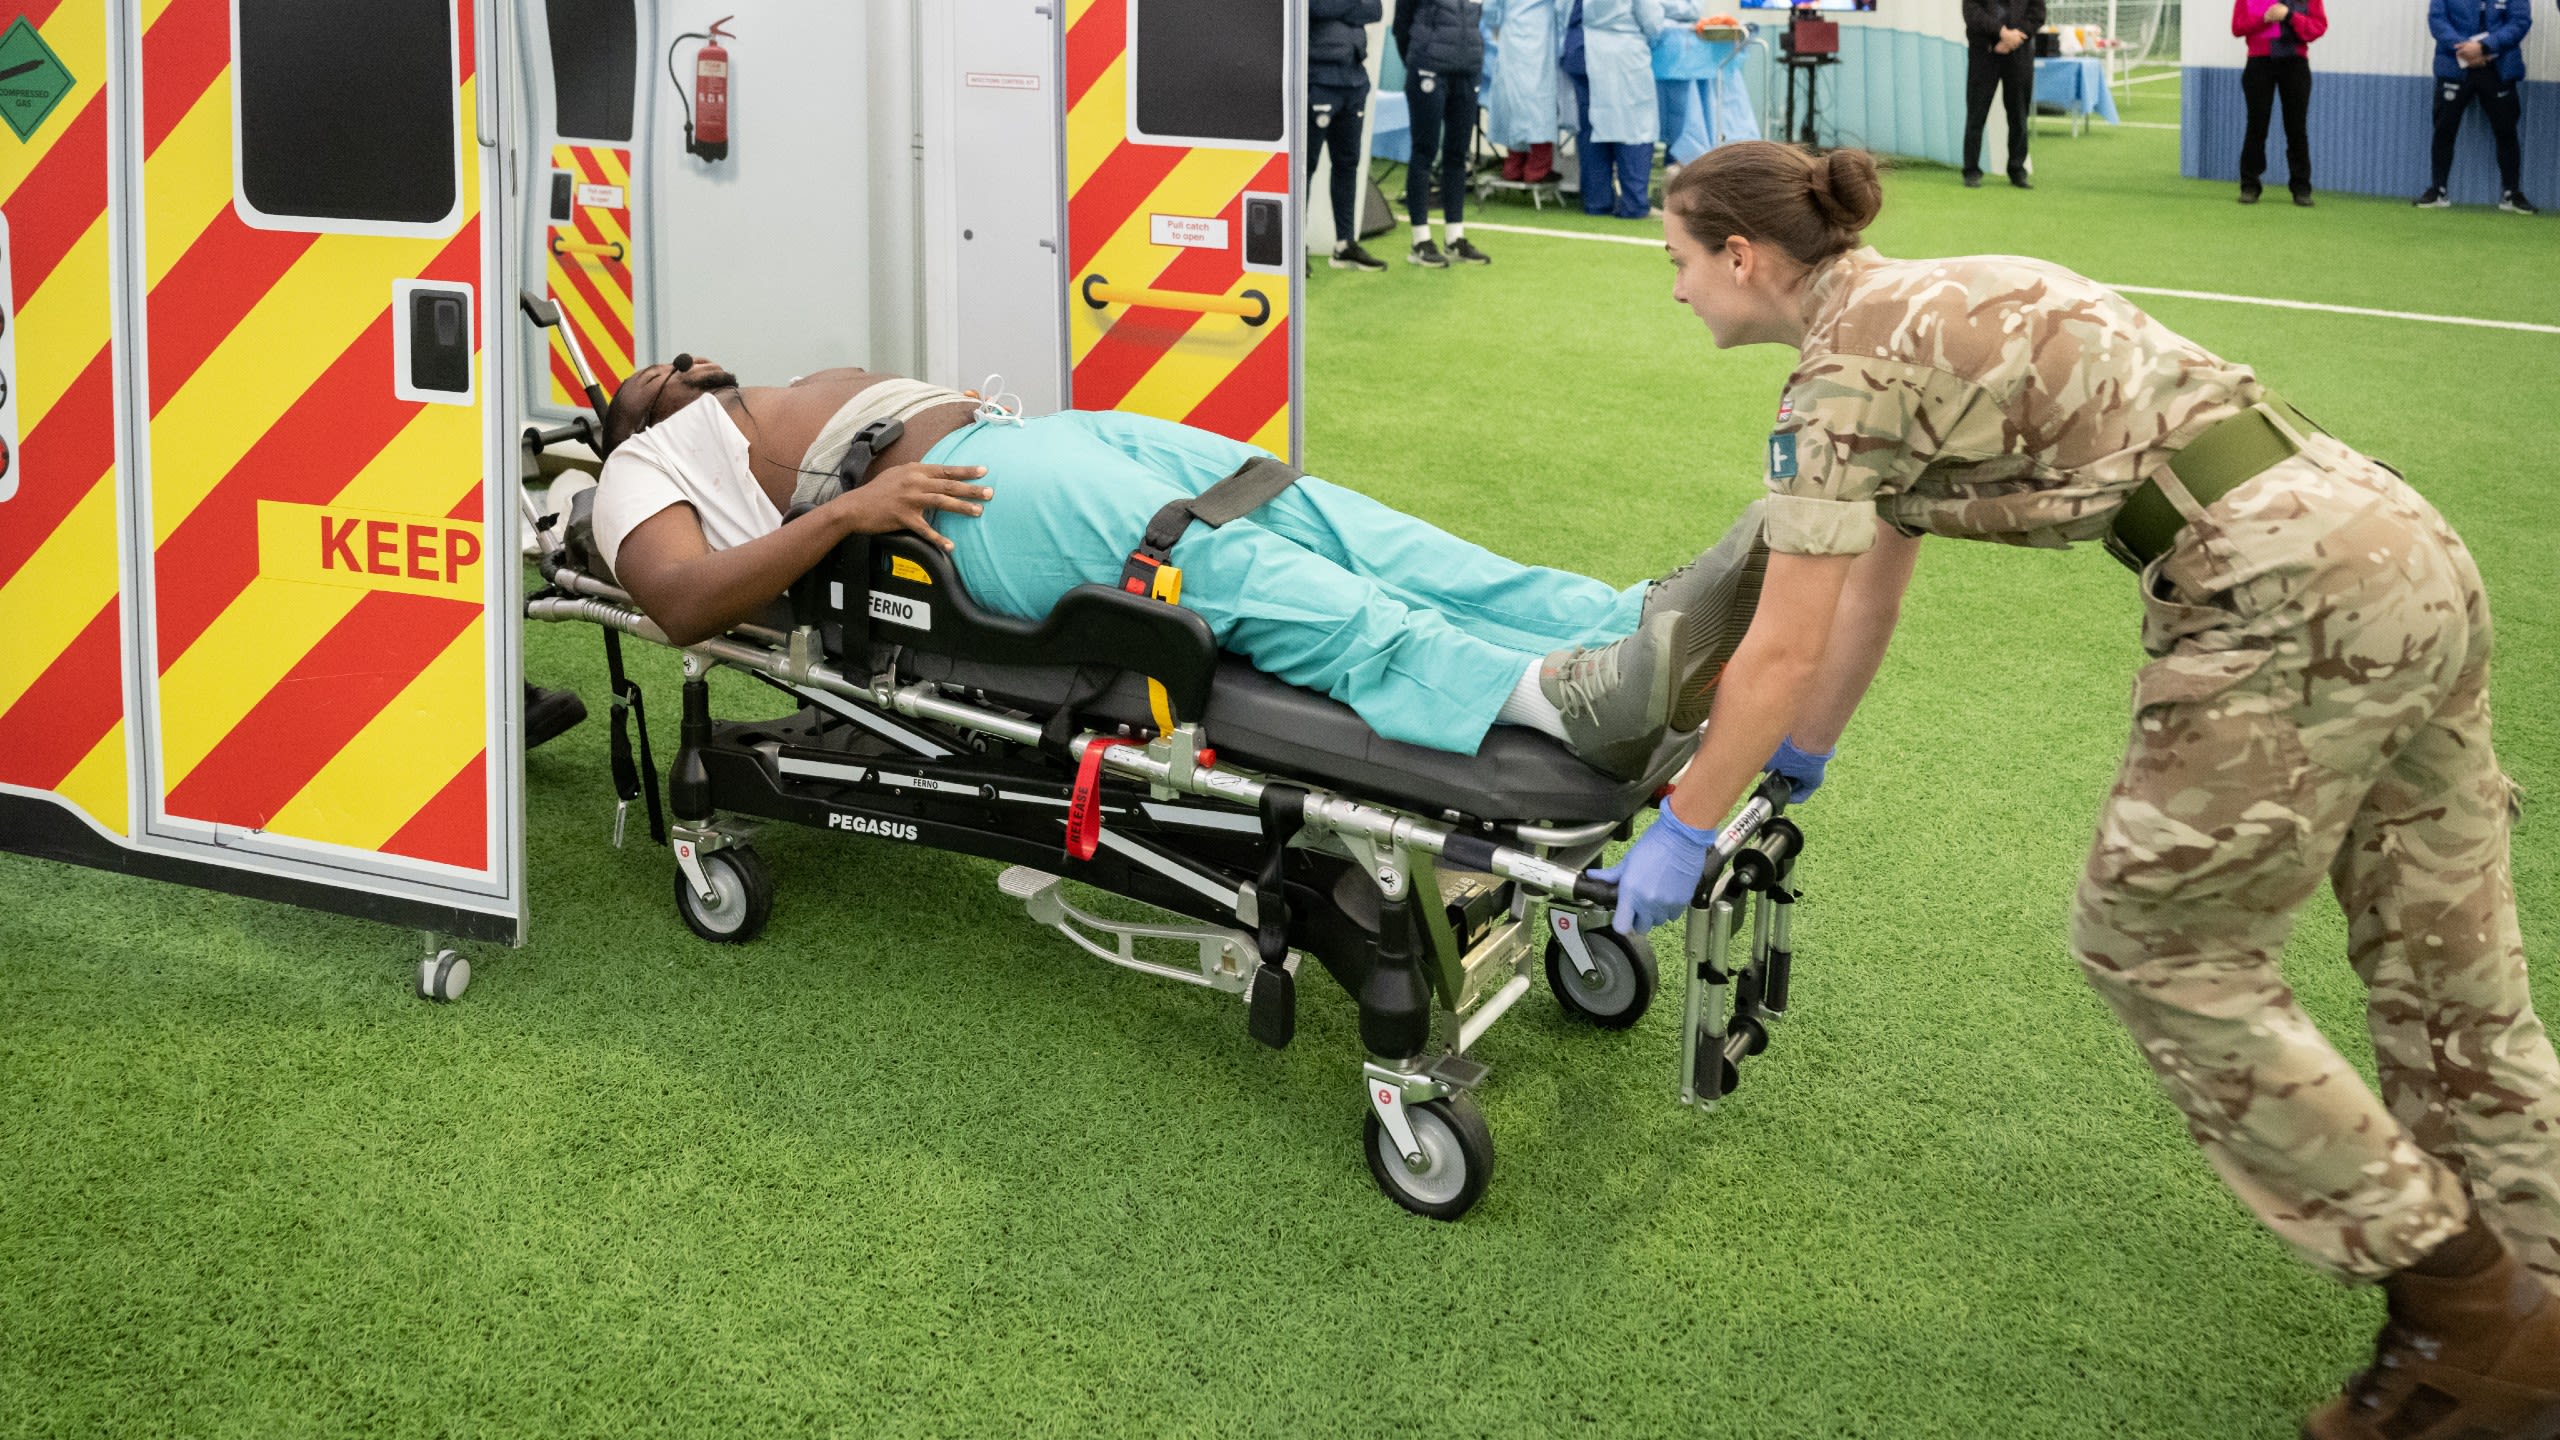 An actor is taken to an ambulance during the SHARP workshop.